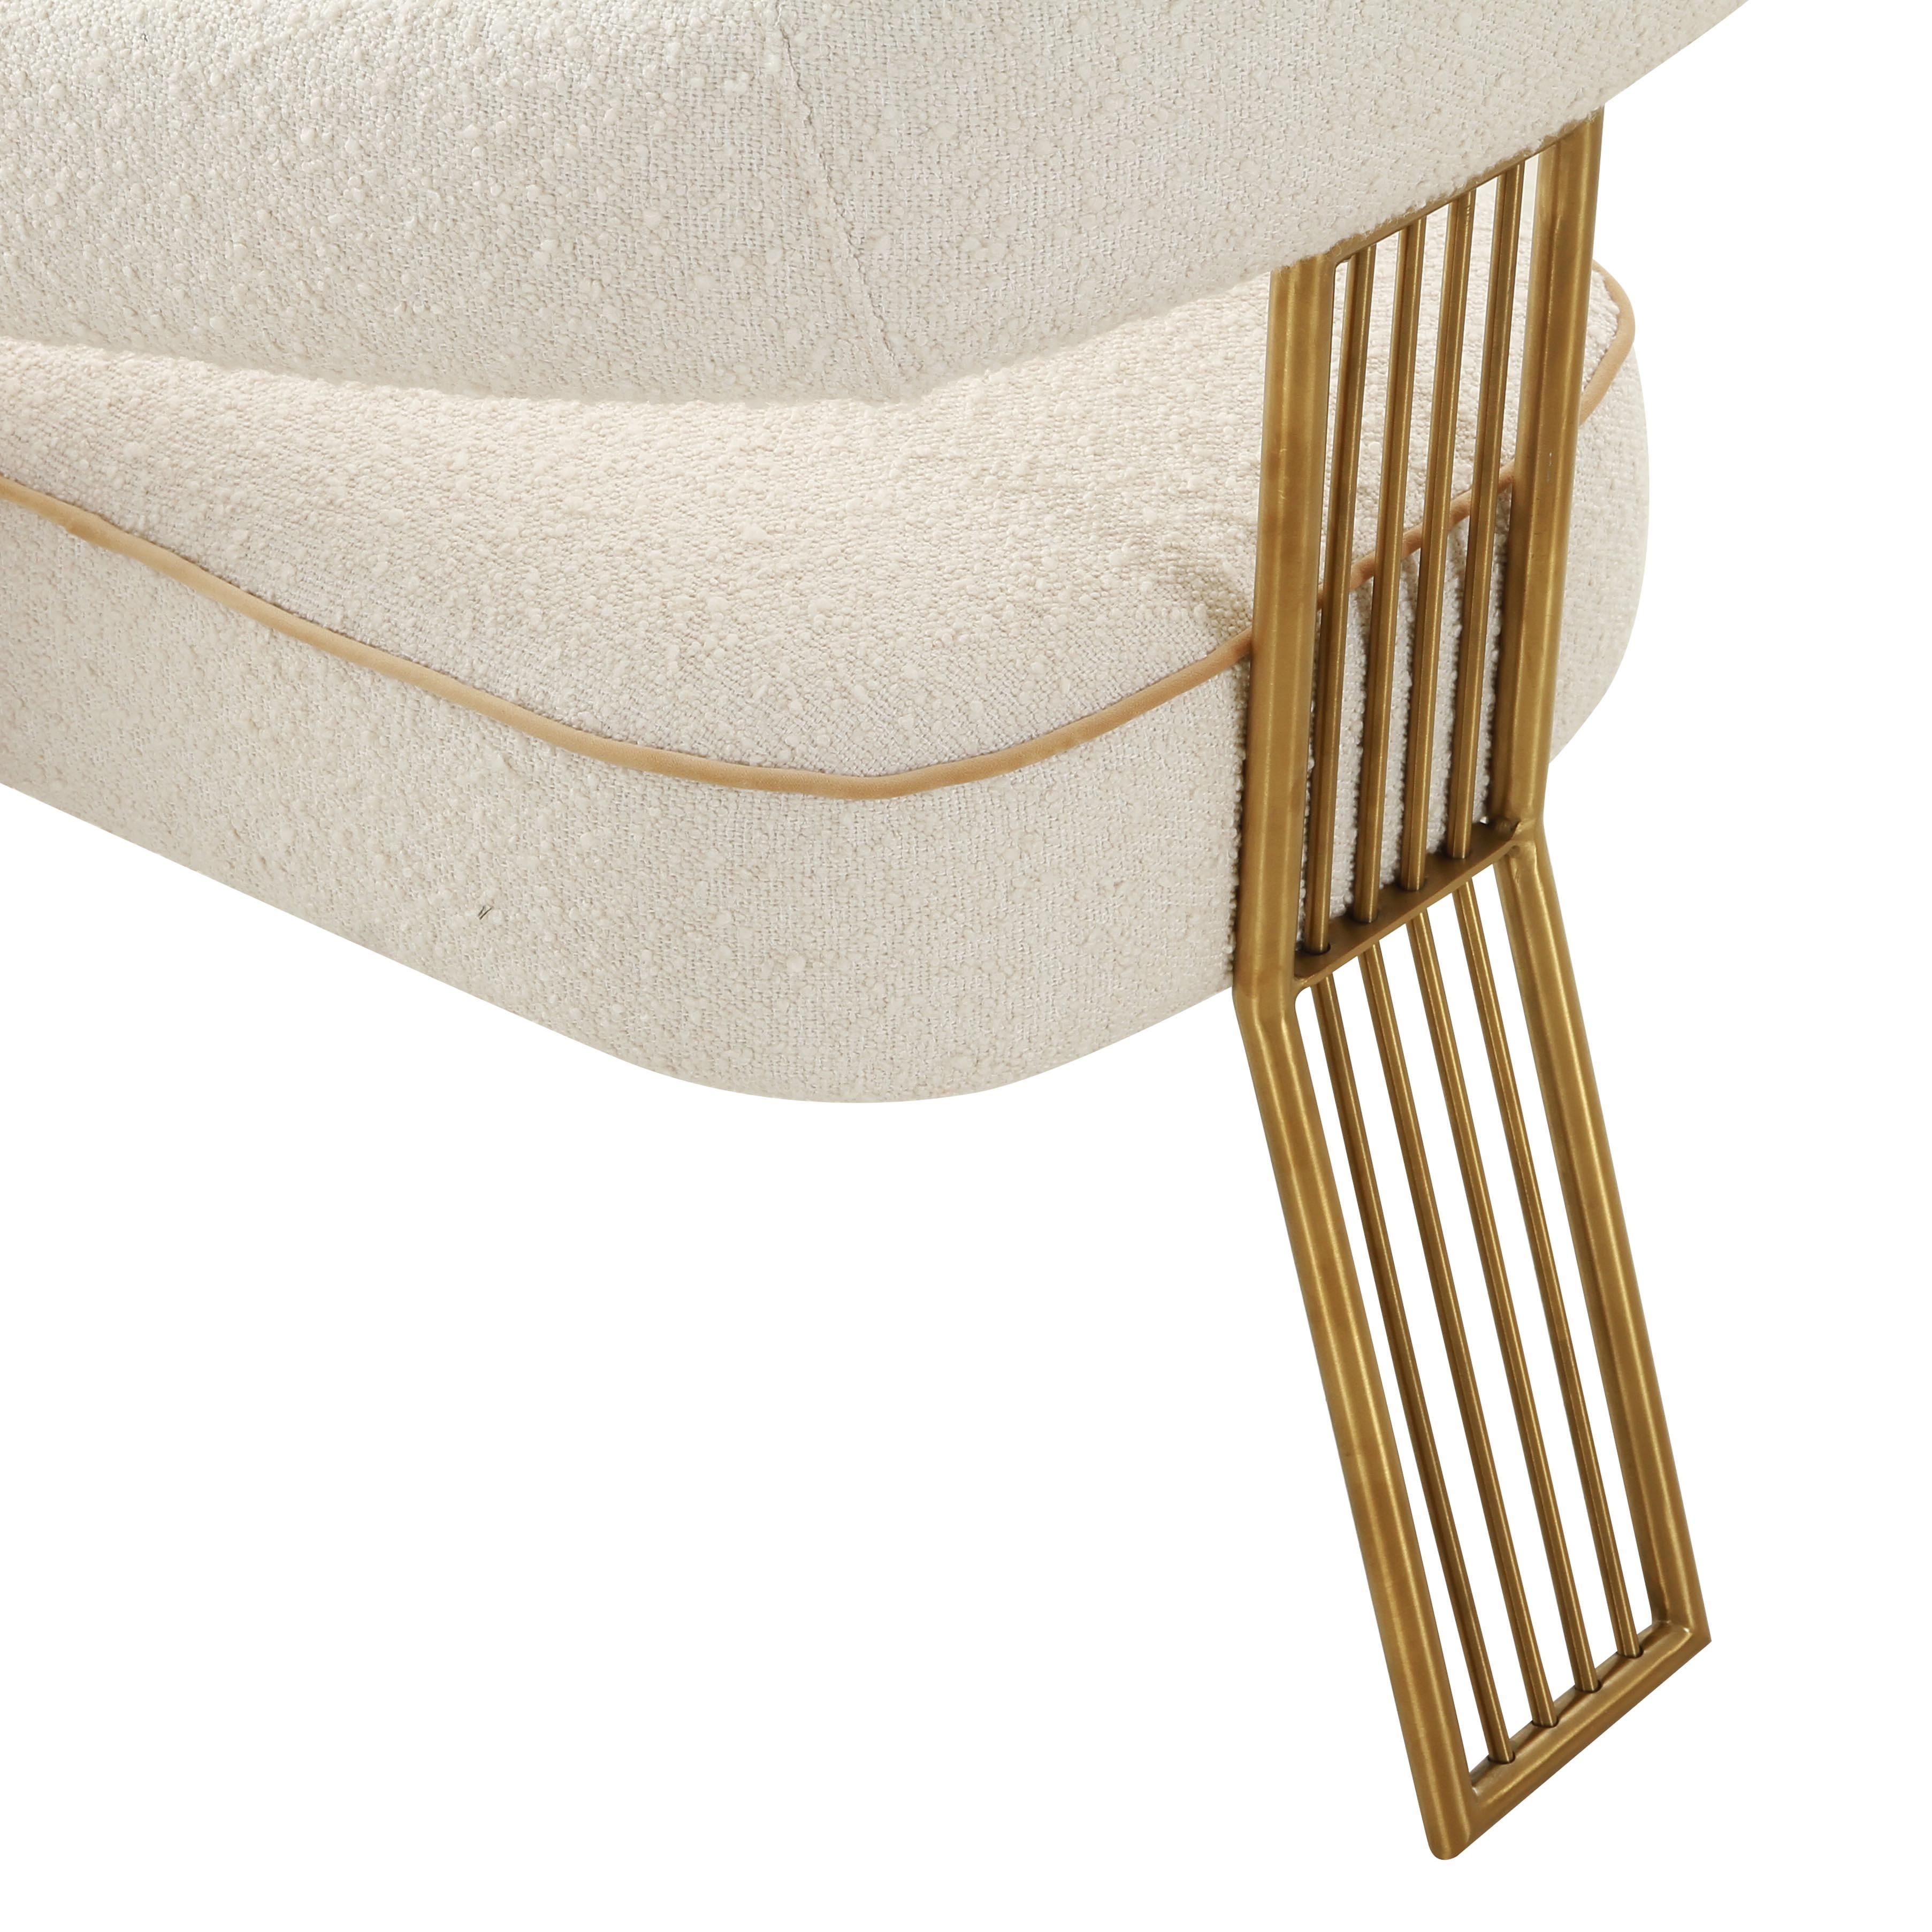 Corralis Cream Boucle Dining Chair - Image 3